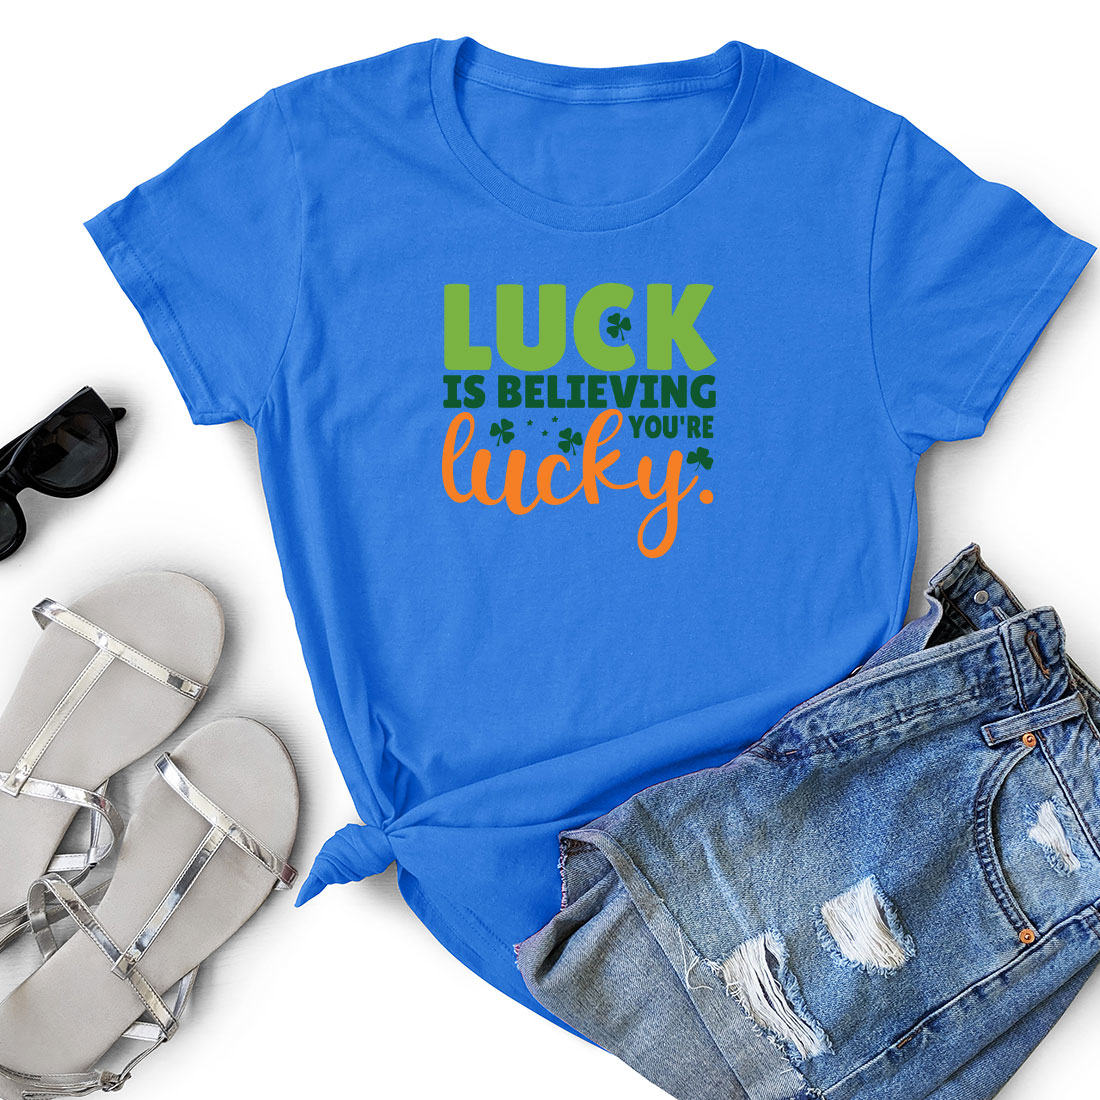 T - shirt that says luck is believing be you're lucky.